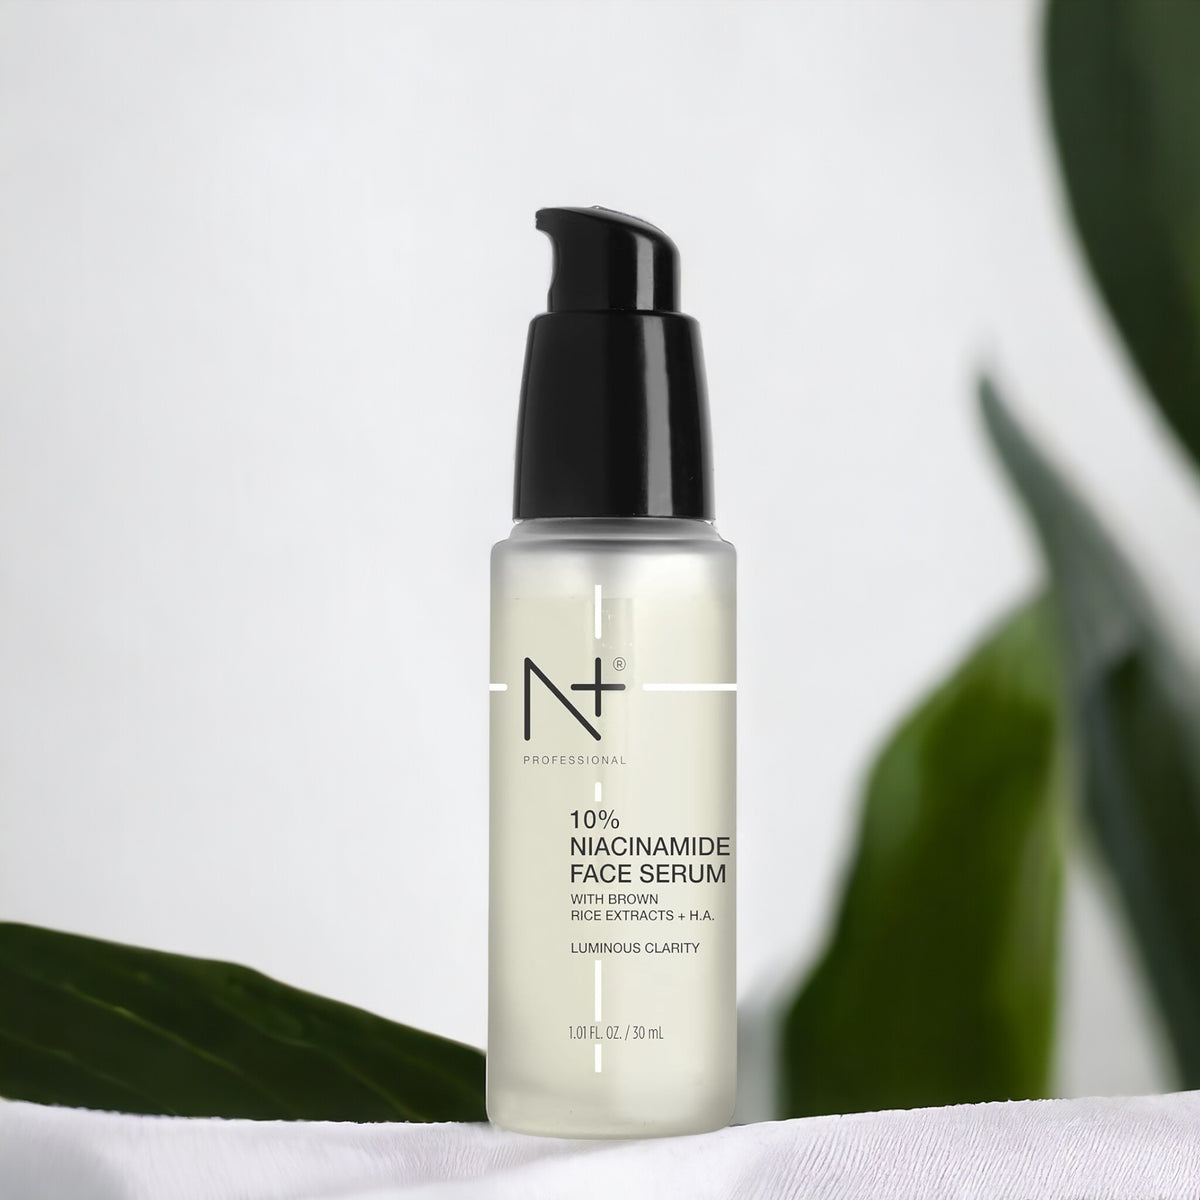 10% Niacinamide Face Serum, For Luminous Clarity with Brown rice extracts + H.A - 30ML